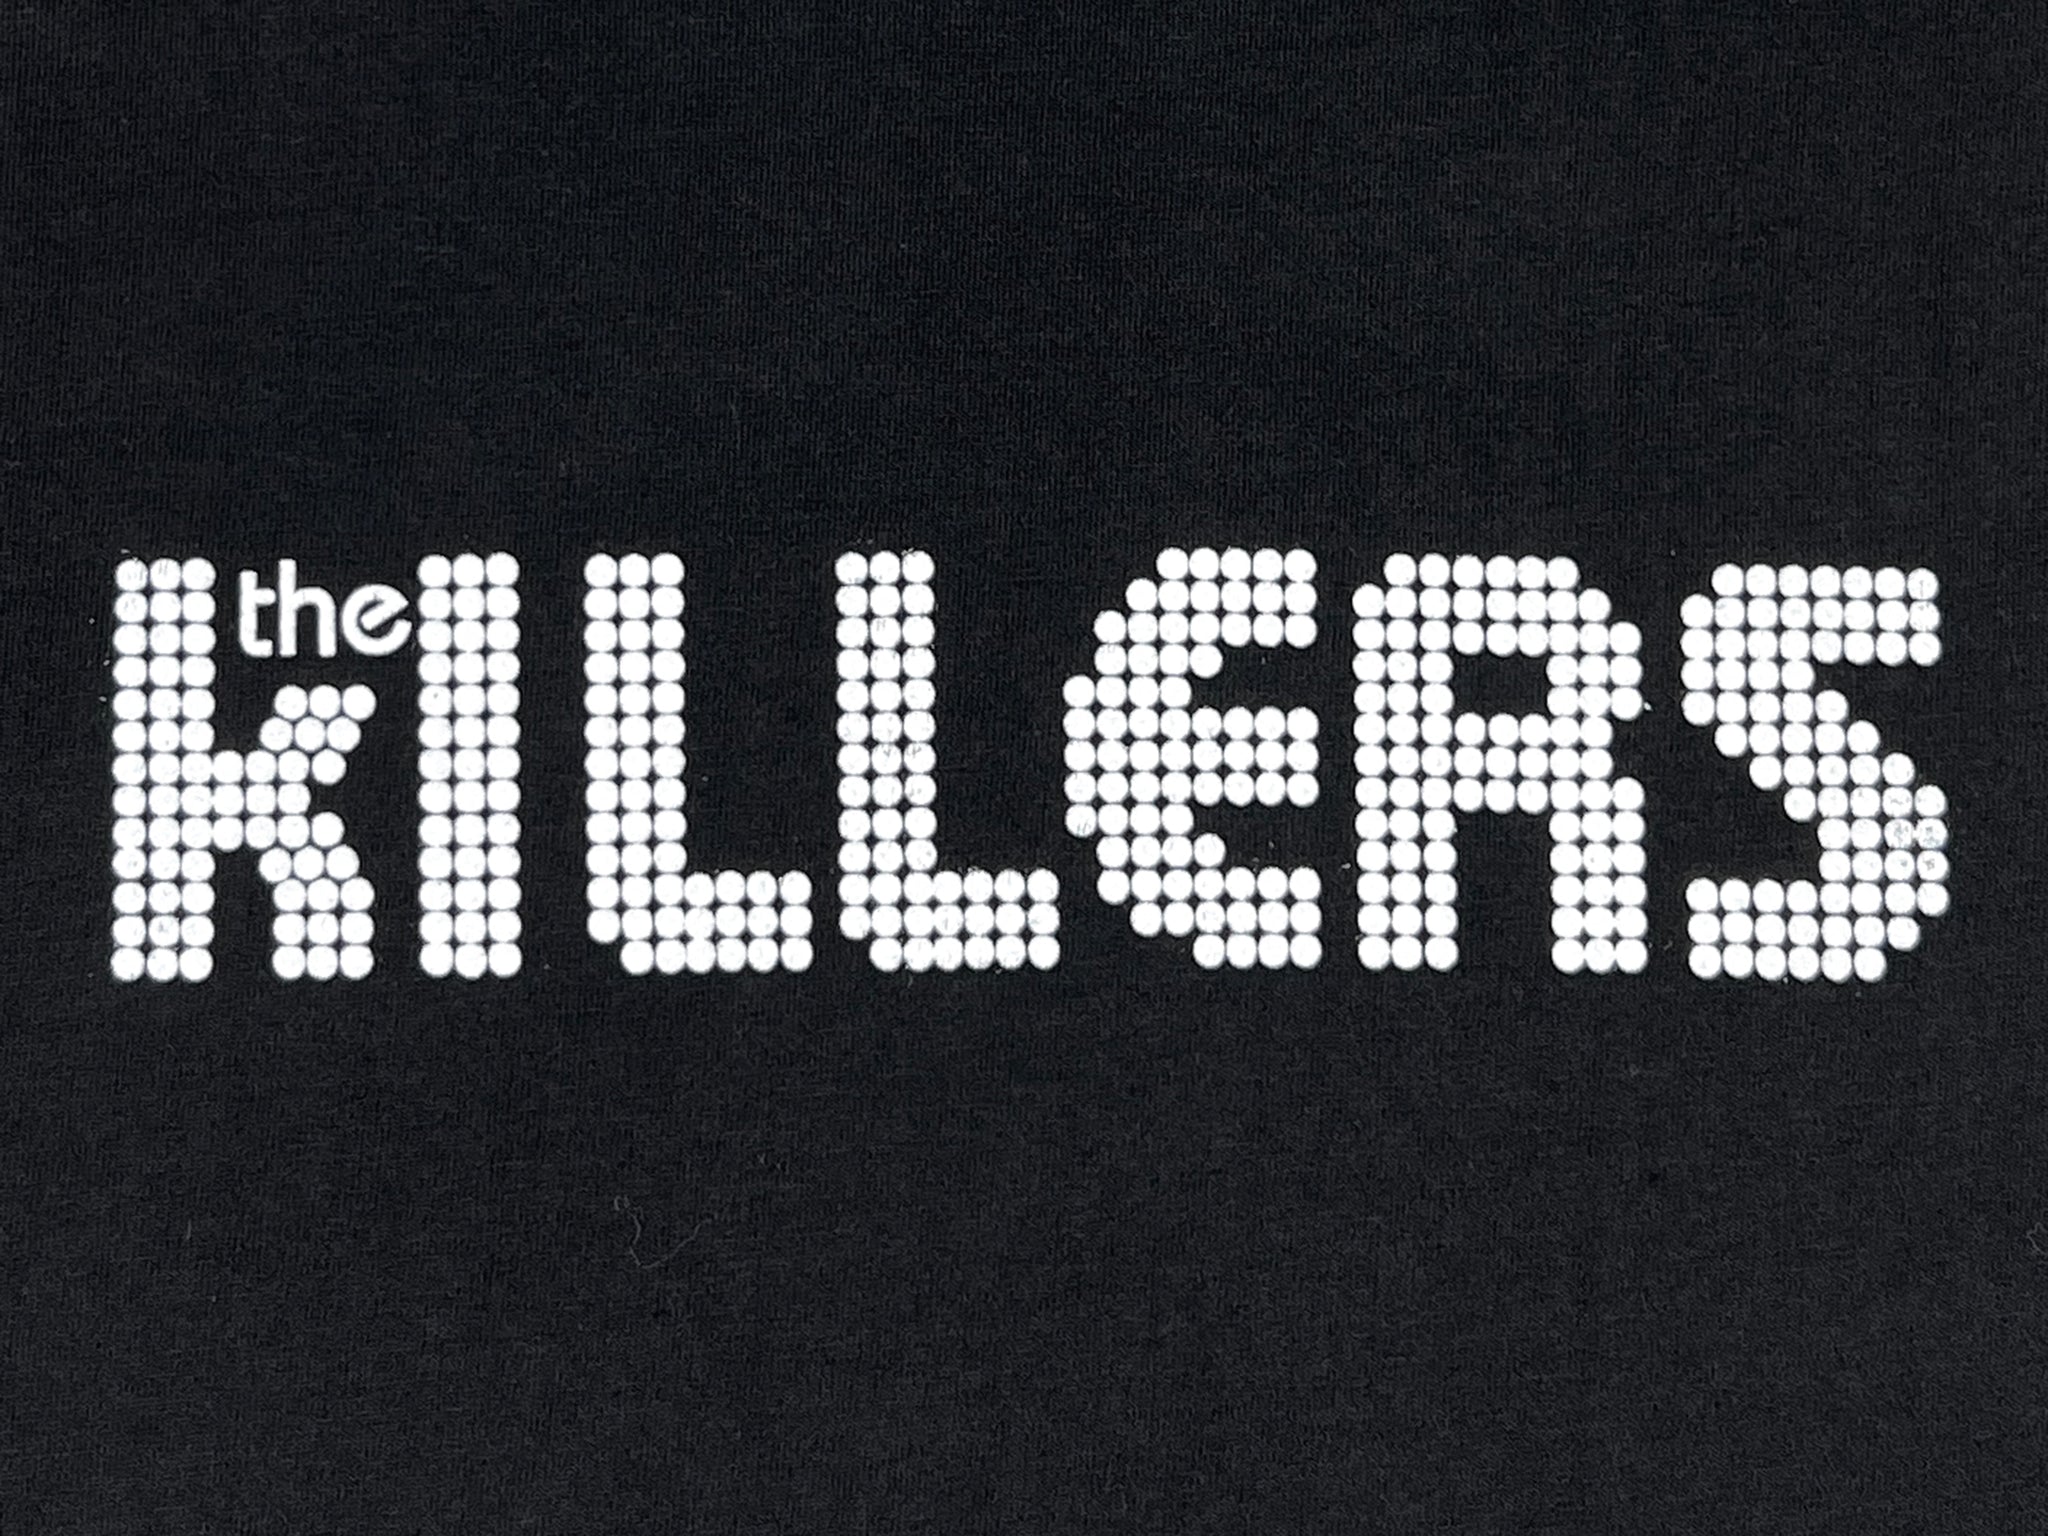 The Killers T-Shirt